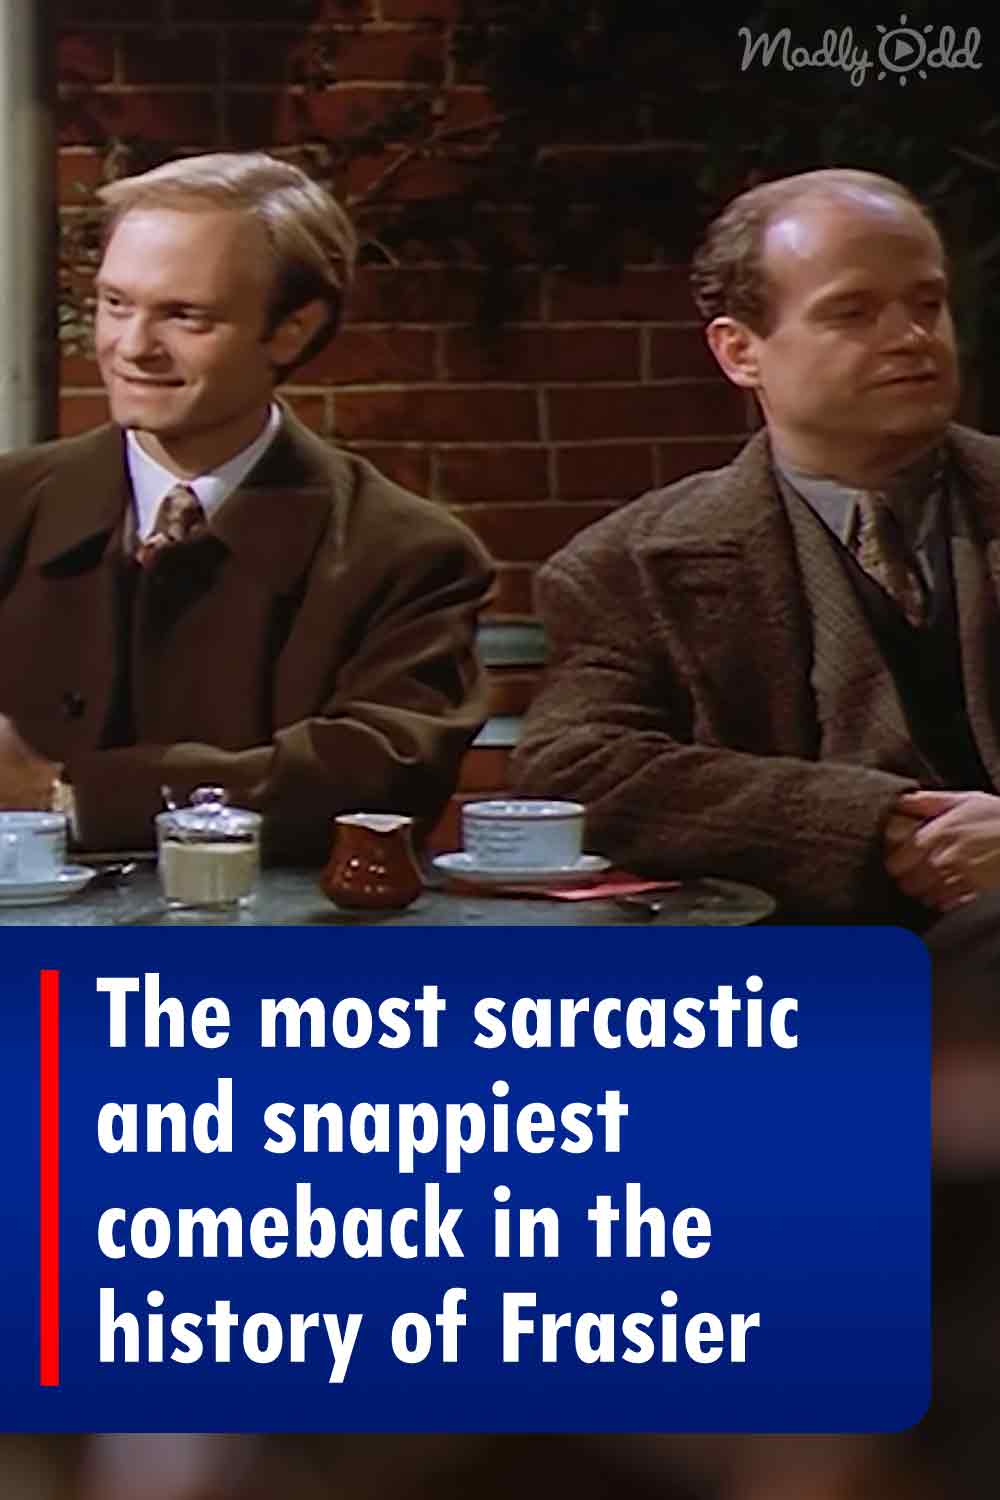 The most sarcastic and snappiest comeback in the history of Frasier